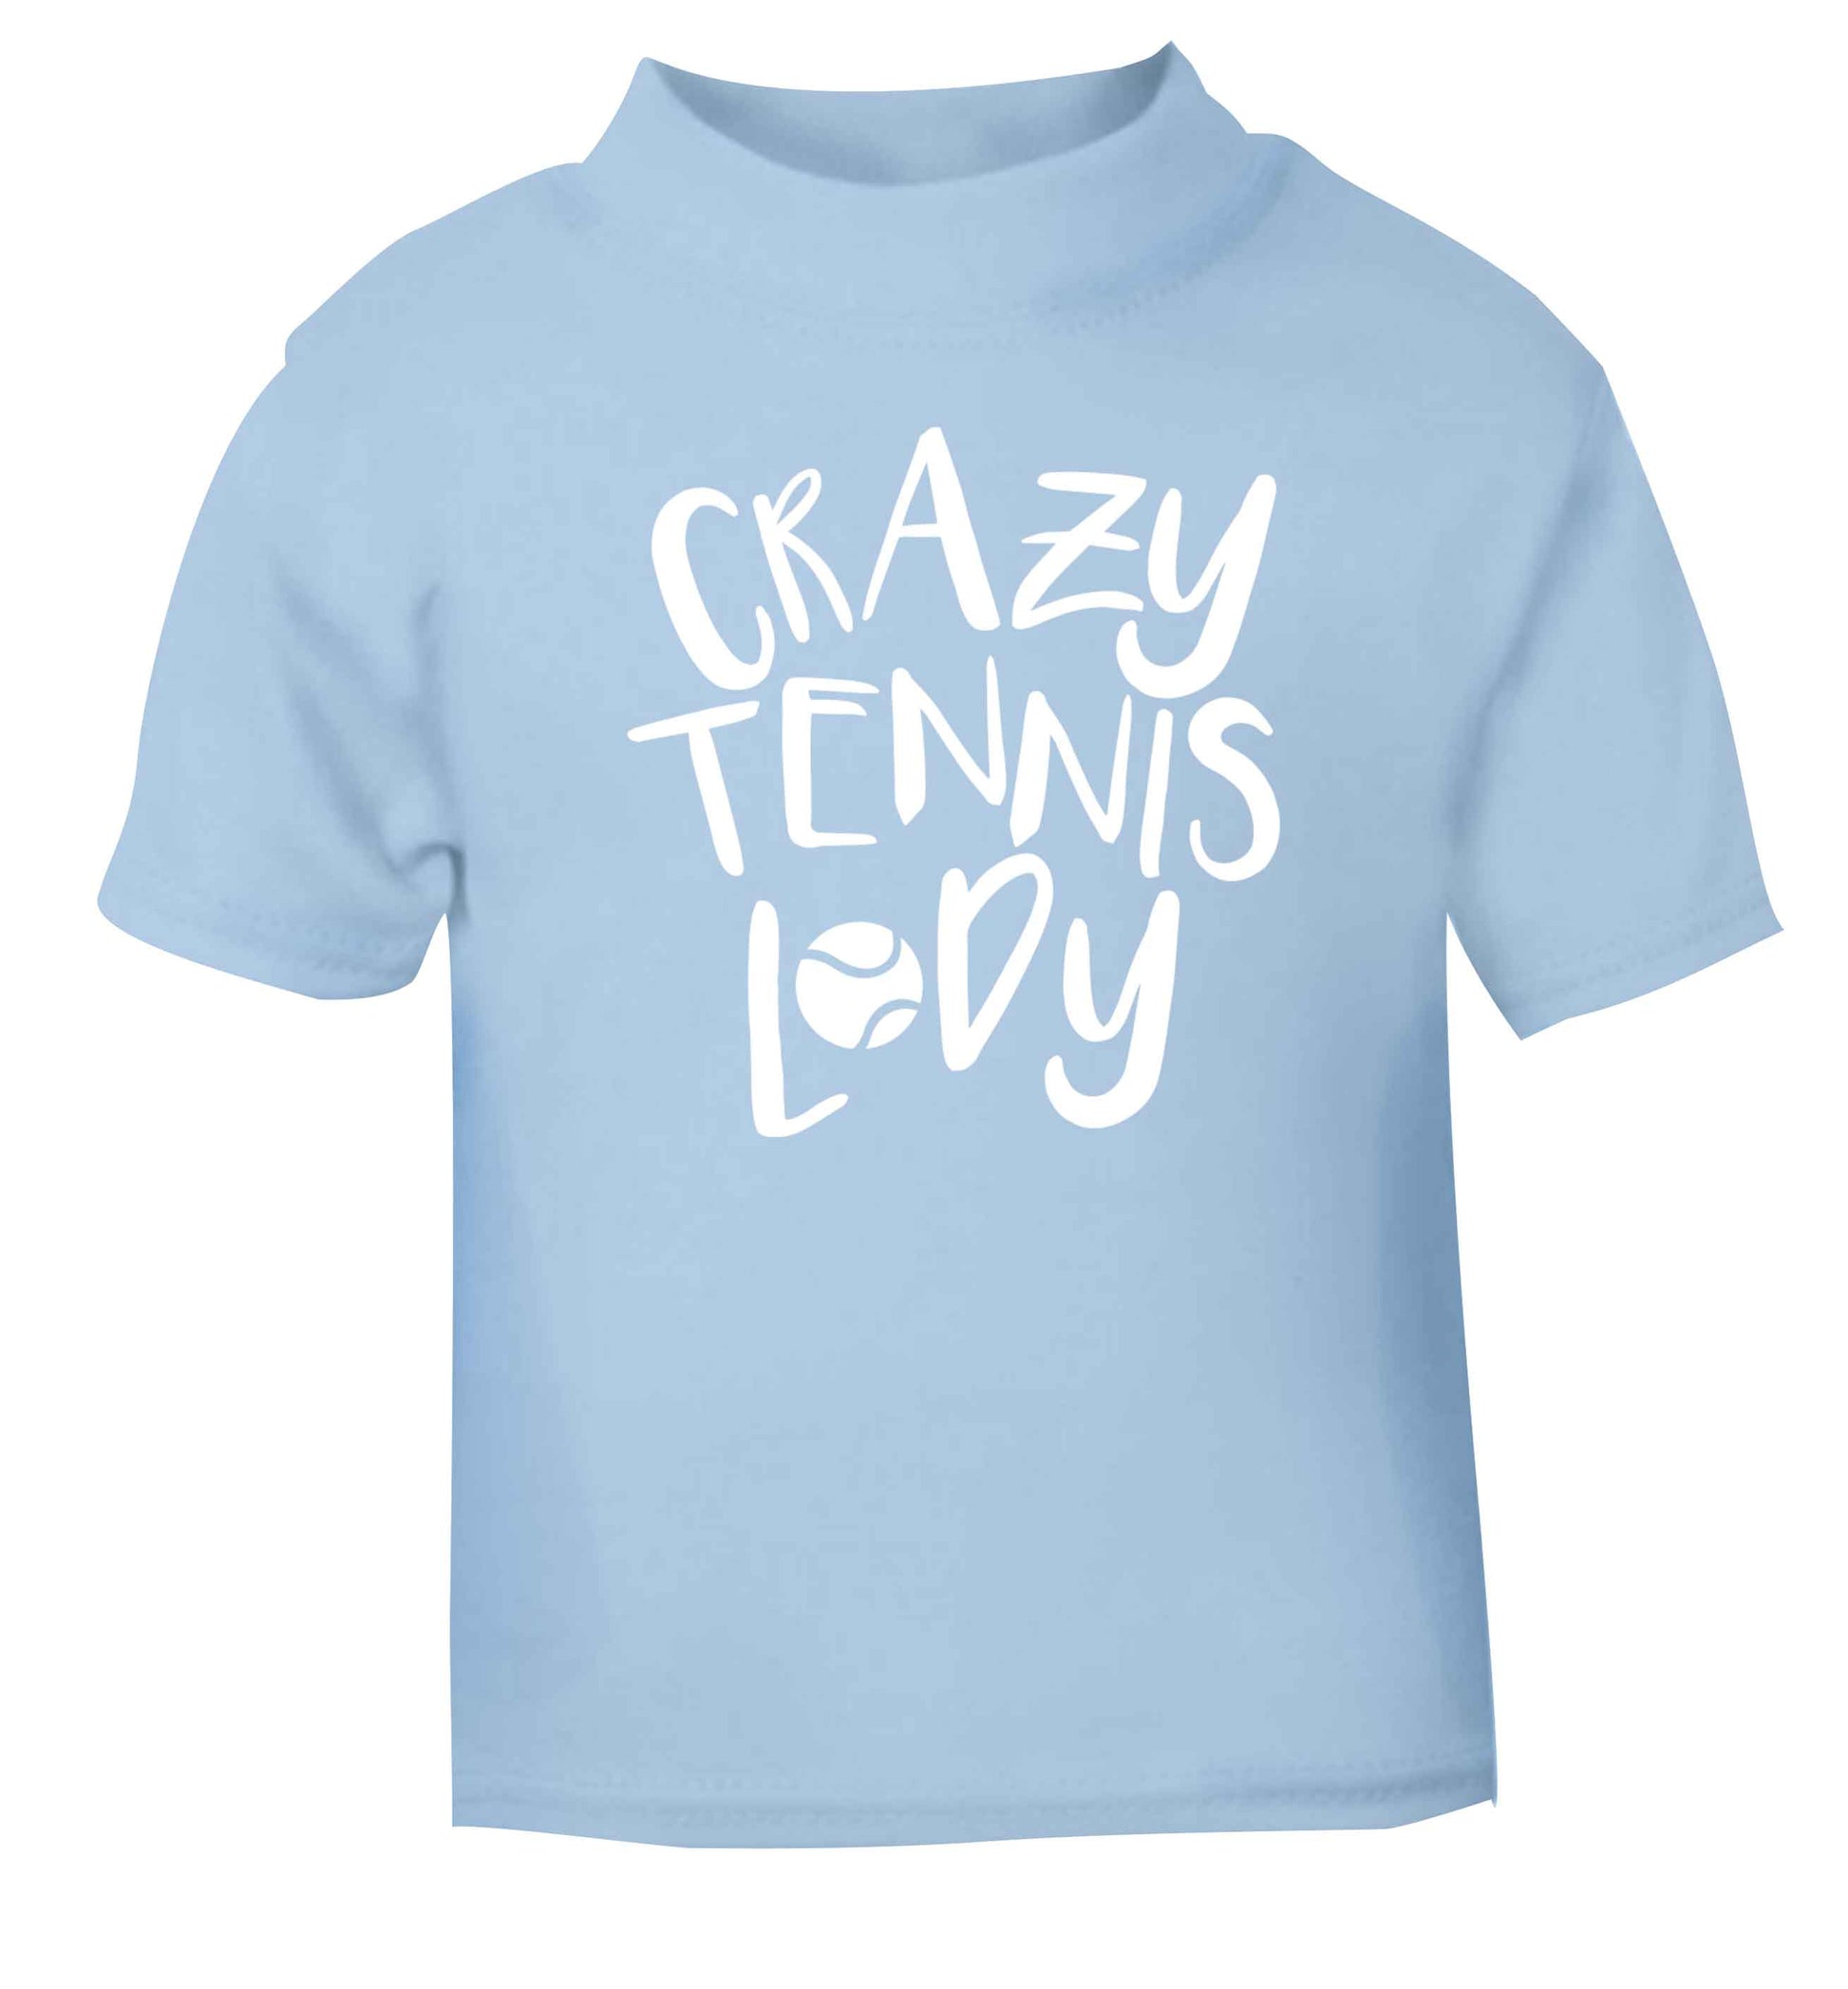 Crazy tennis lady light blue Baby Toddler Tshirt 2 Years